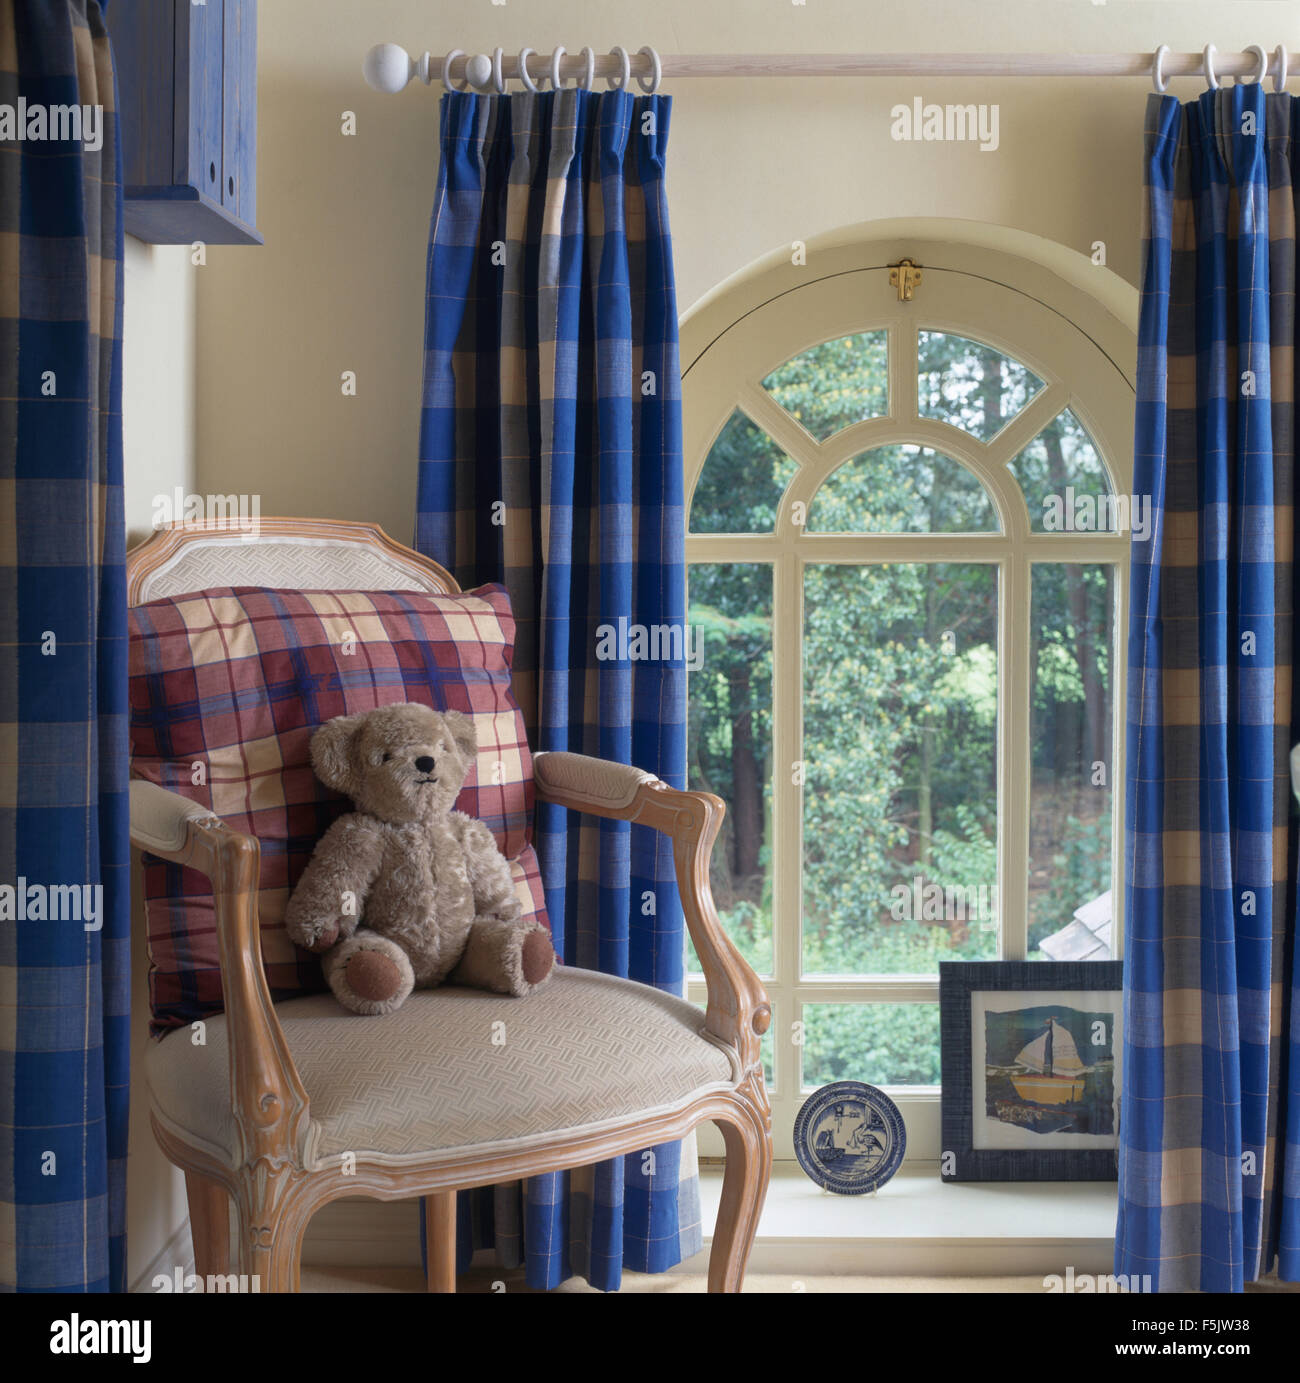 Teddy bear and checked cushion on chair beside an arched window with blue checked curtains in a country hall Stock Photo